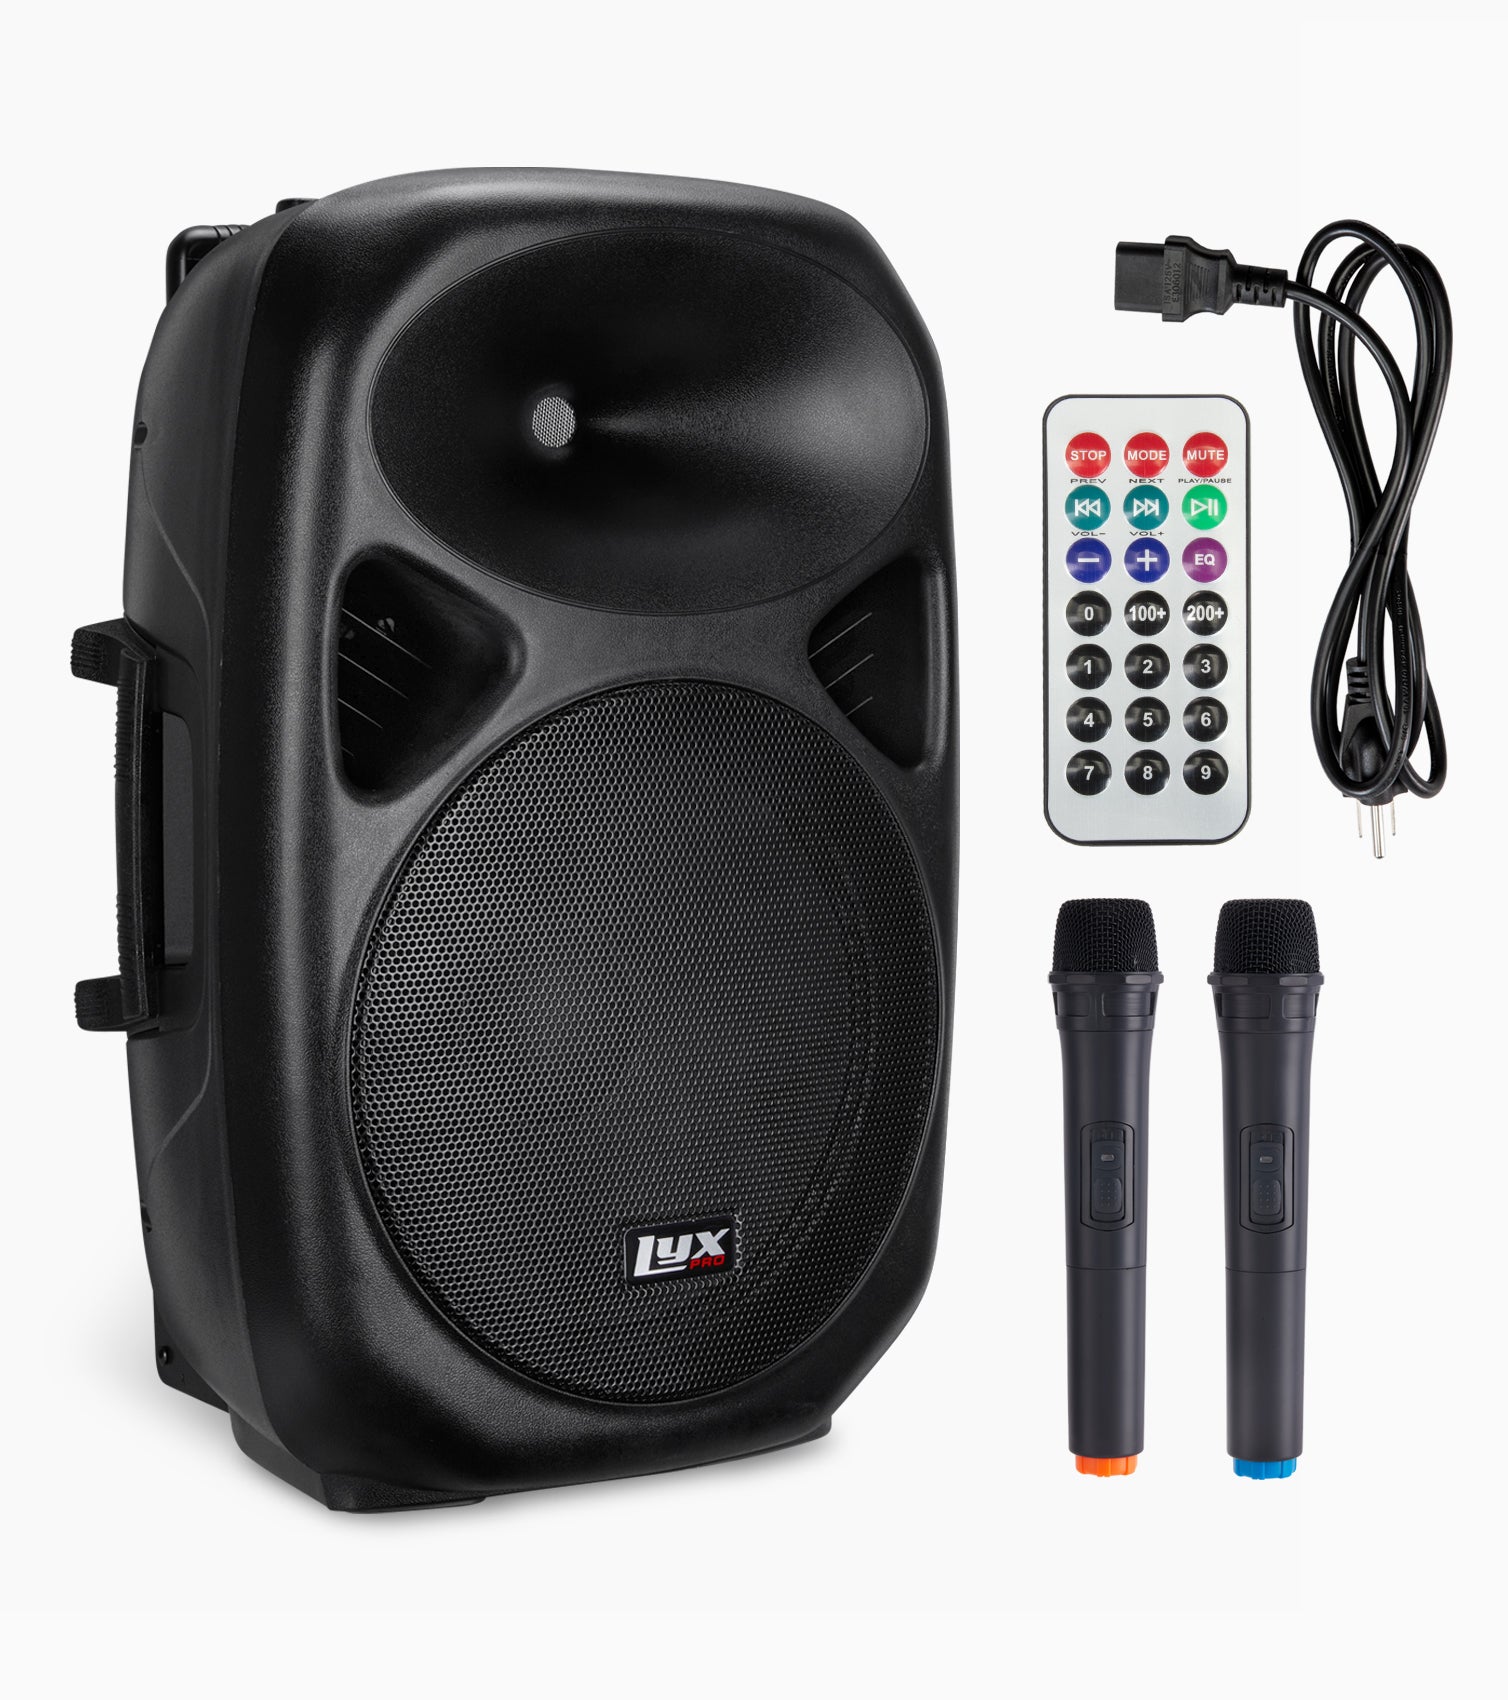 15” portable battery-powered PA speaker, cord, and remote 